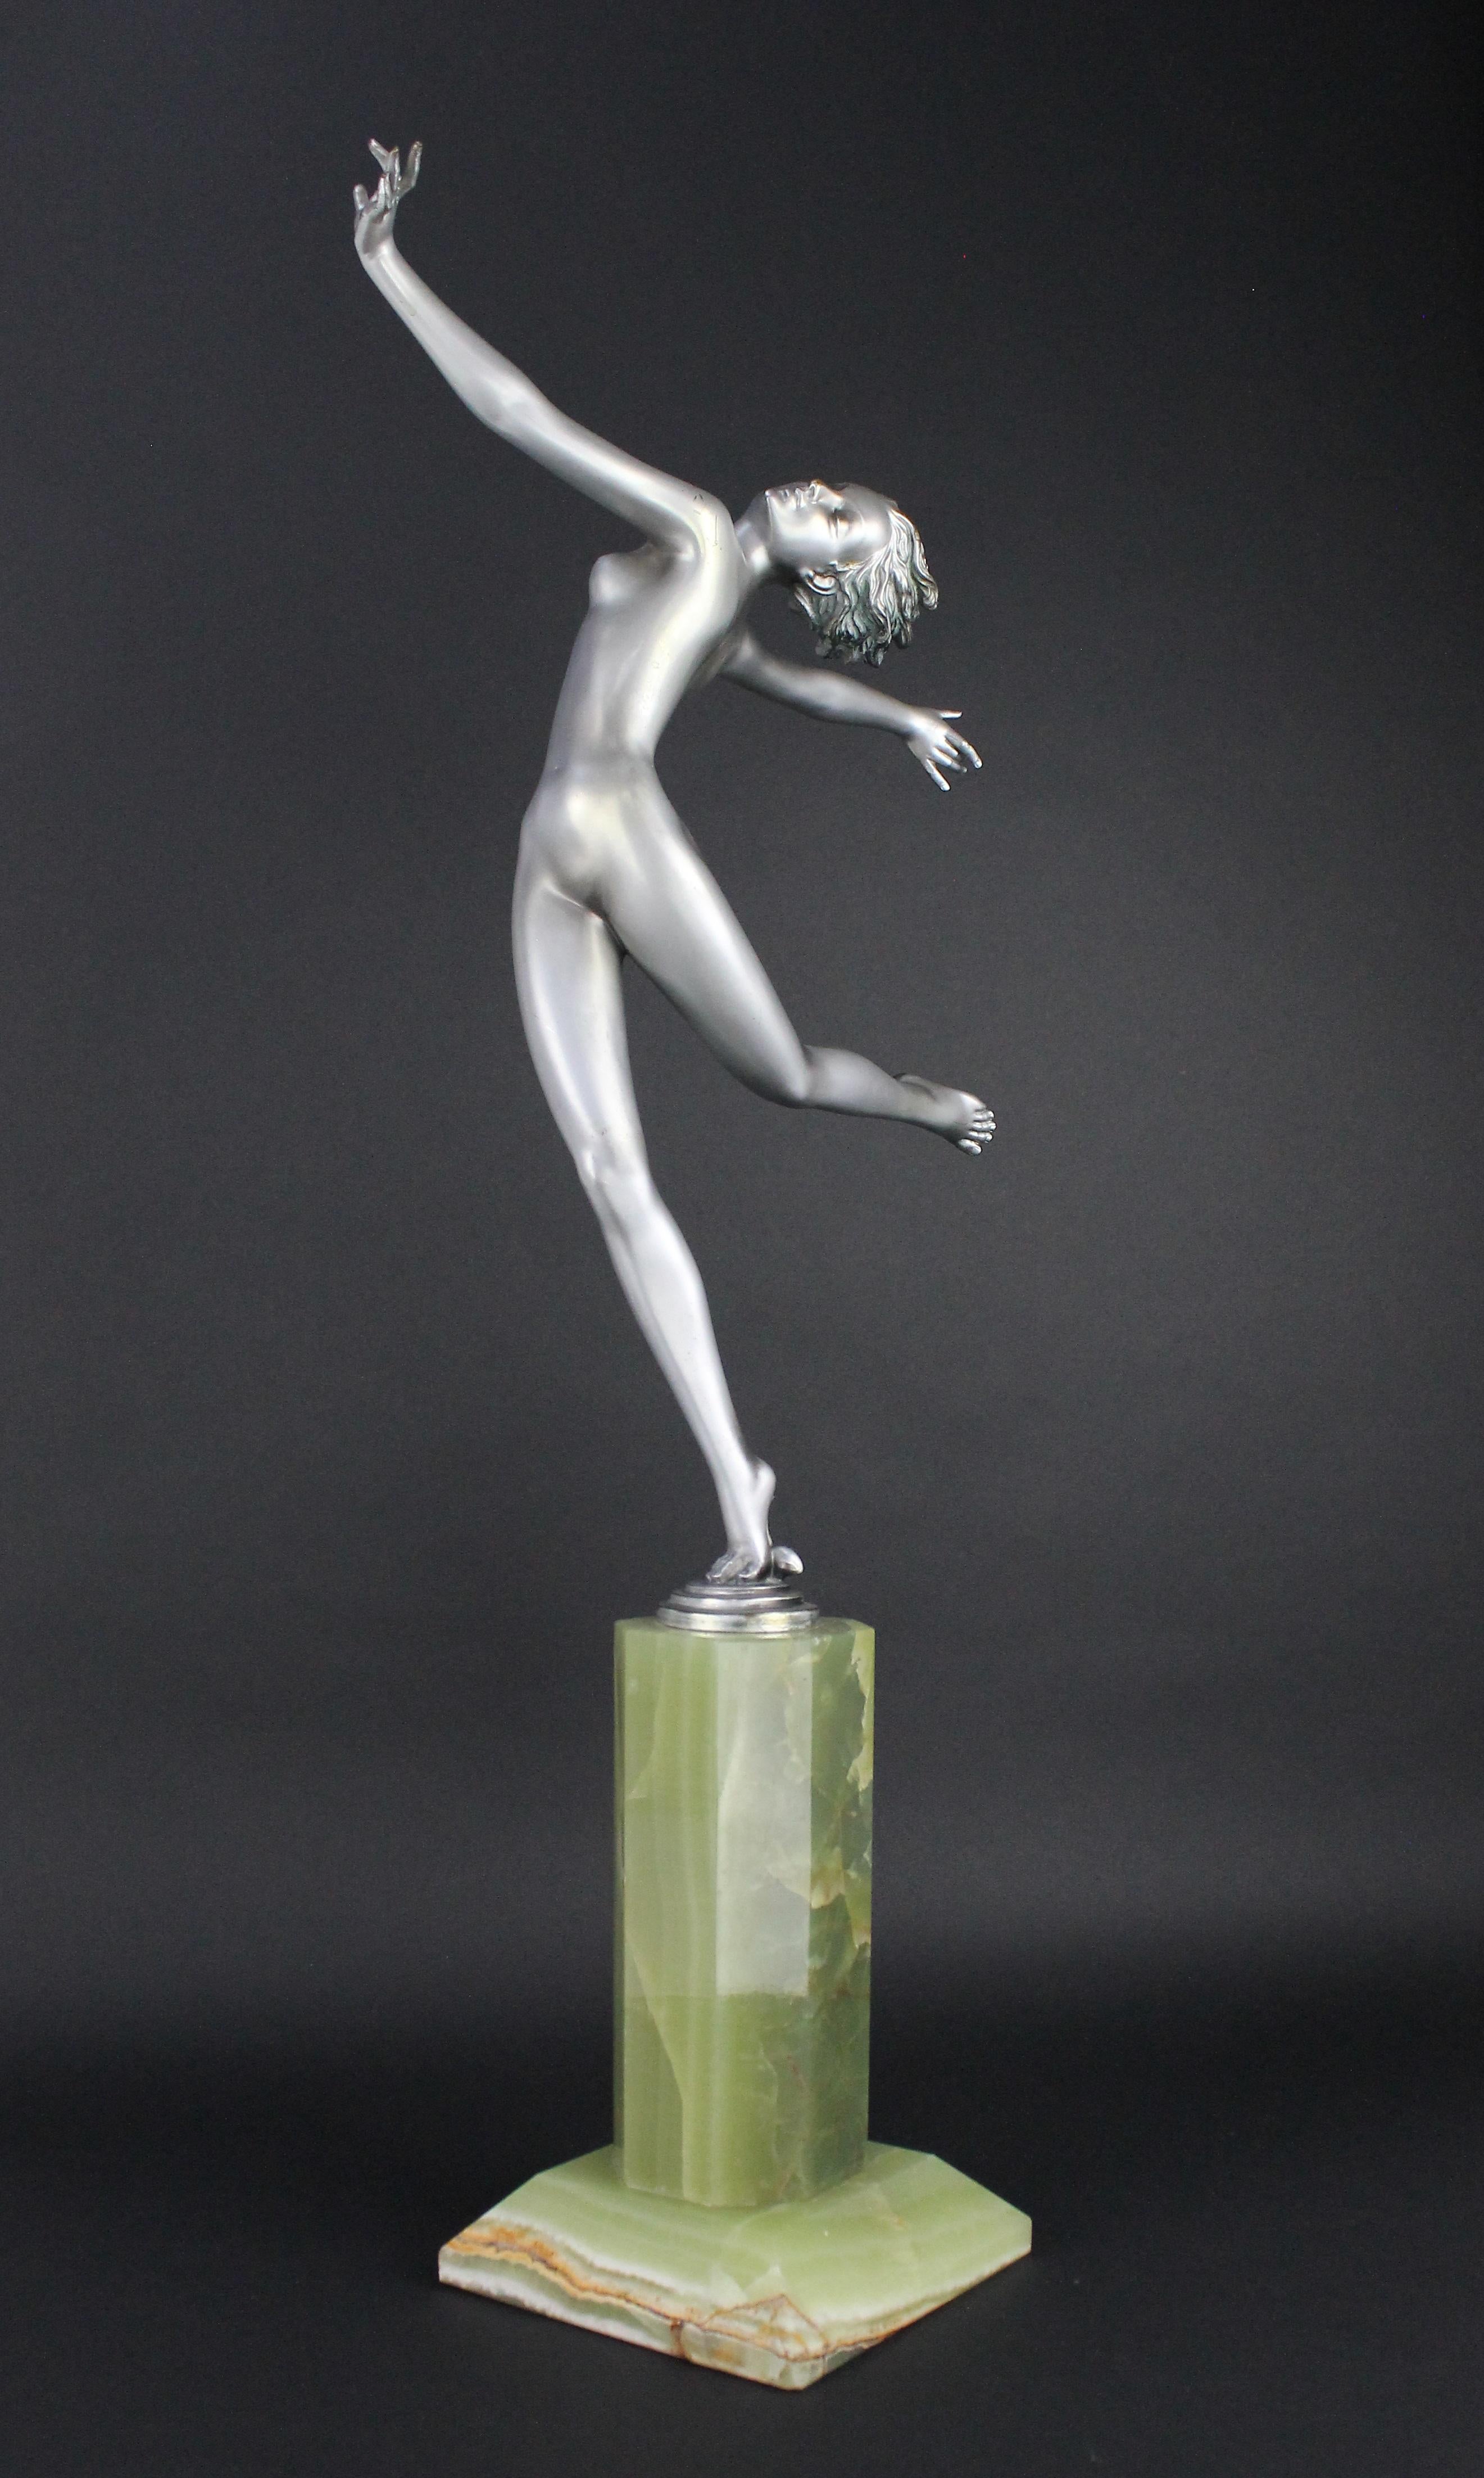 Josef Lorenzl monumental Art Deco bronze sculpture.

Large and impressive, height 75cm.
The cold painted bronze sculpture is mounted on a Brazilian green onyx plinth.
The plinth has a minor and insignificant repair. The onyx base is 16 x